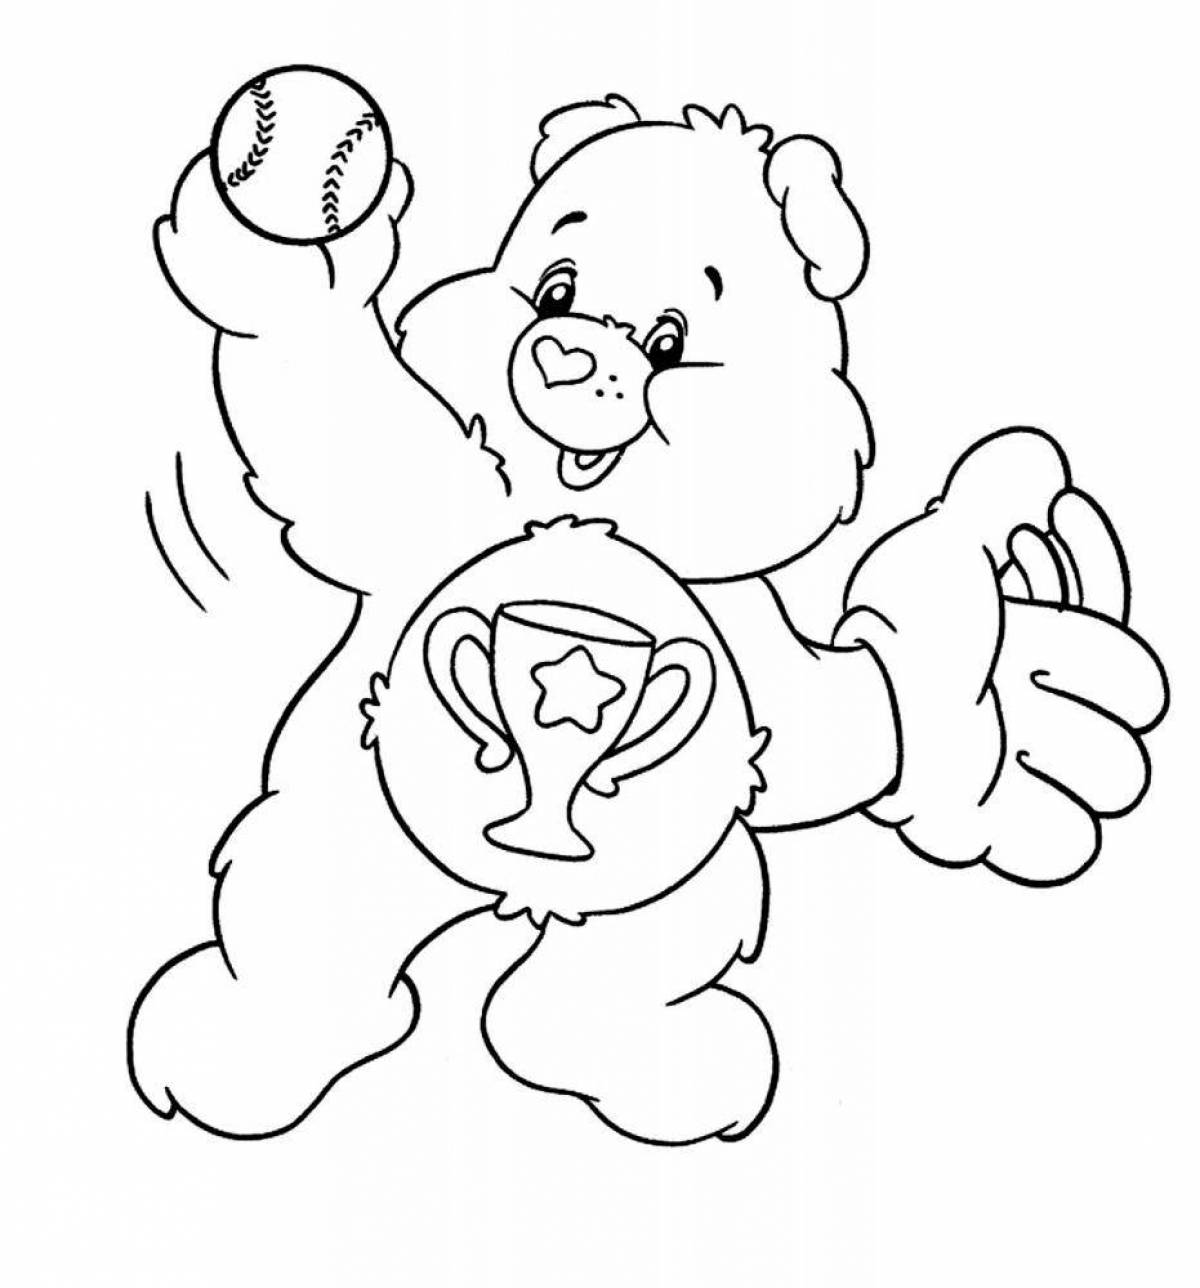 Snuggly care bears coloring page